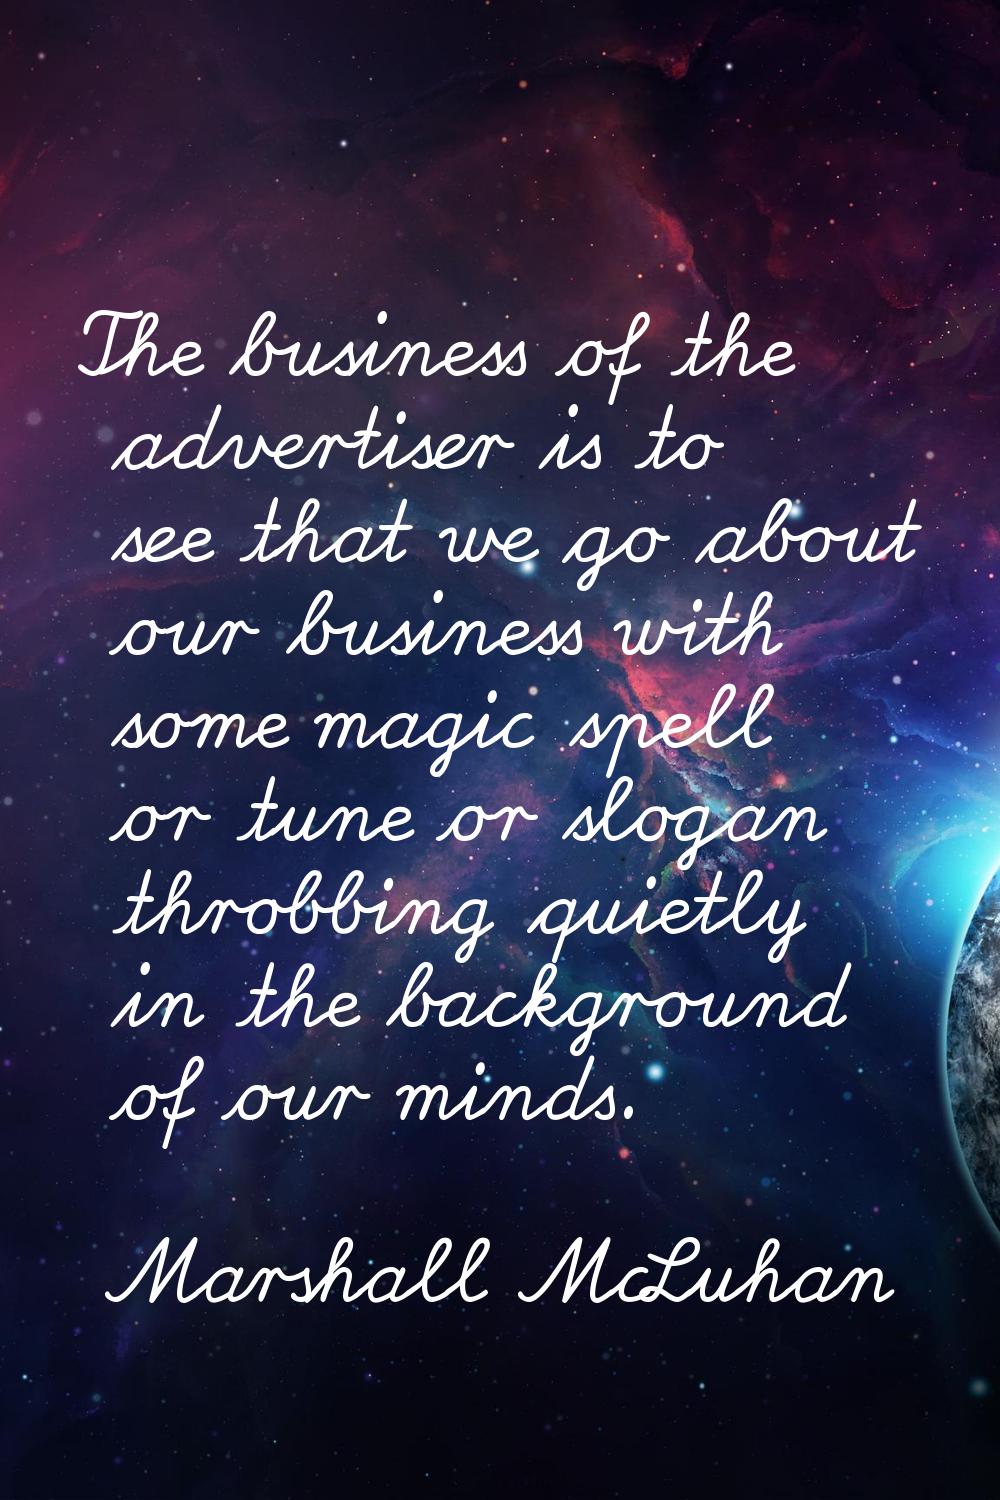 The business of the advertiser is to see that we go about our business with some magic spell or tun